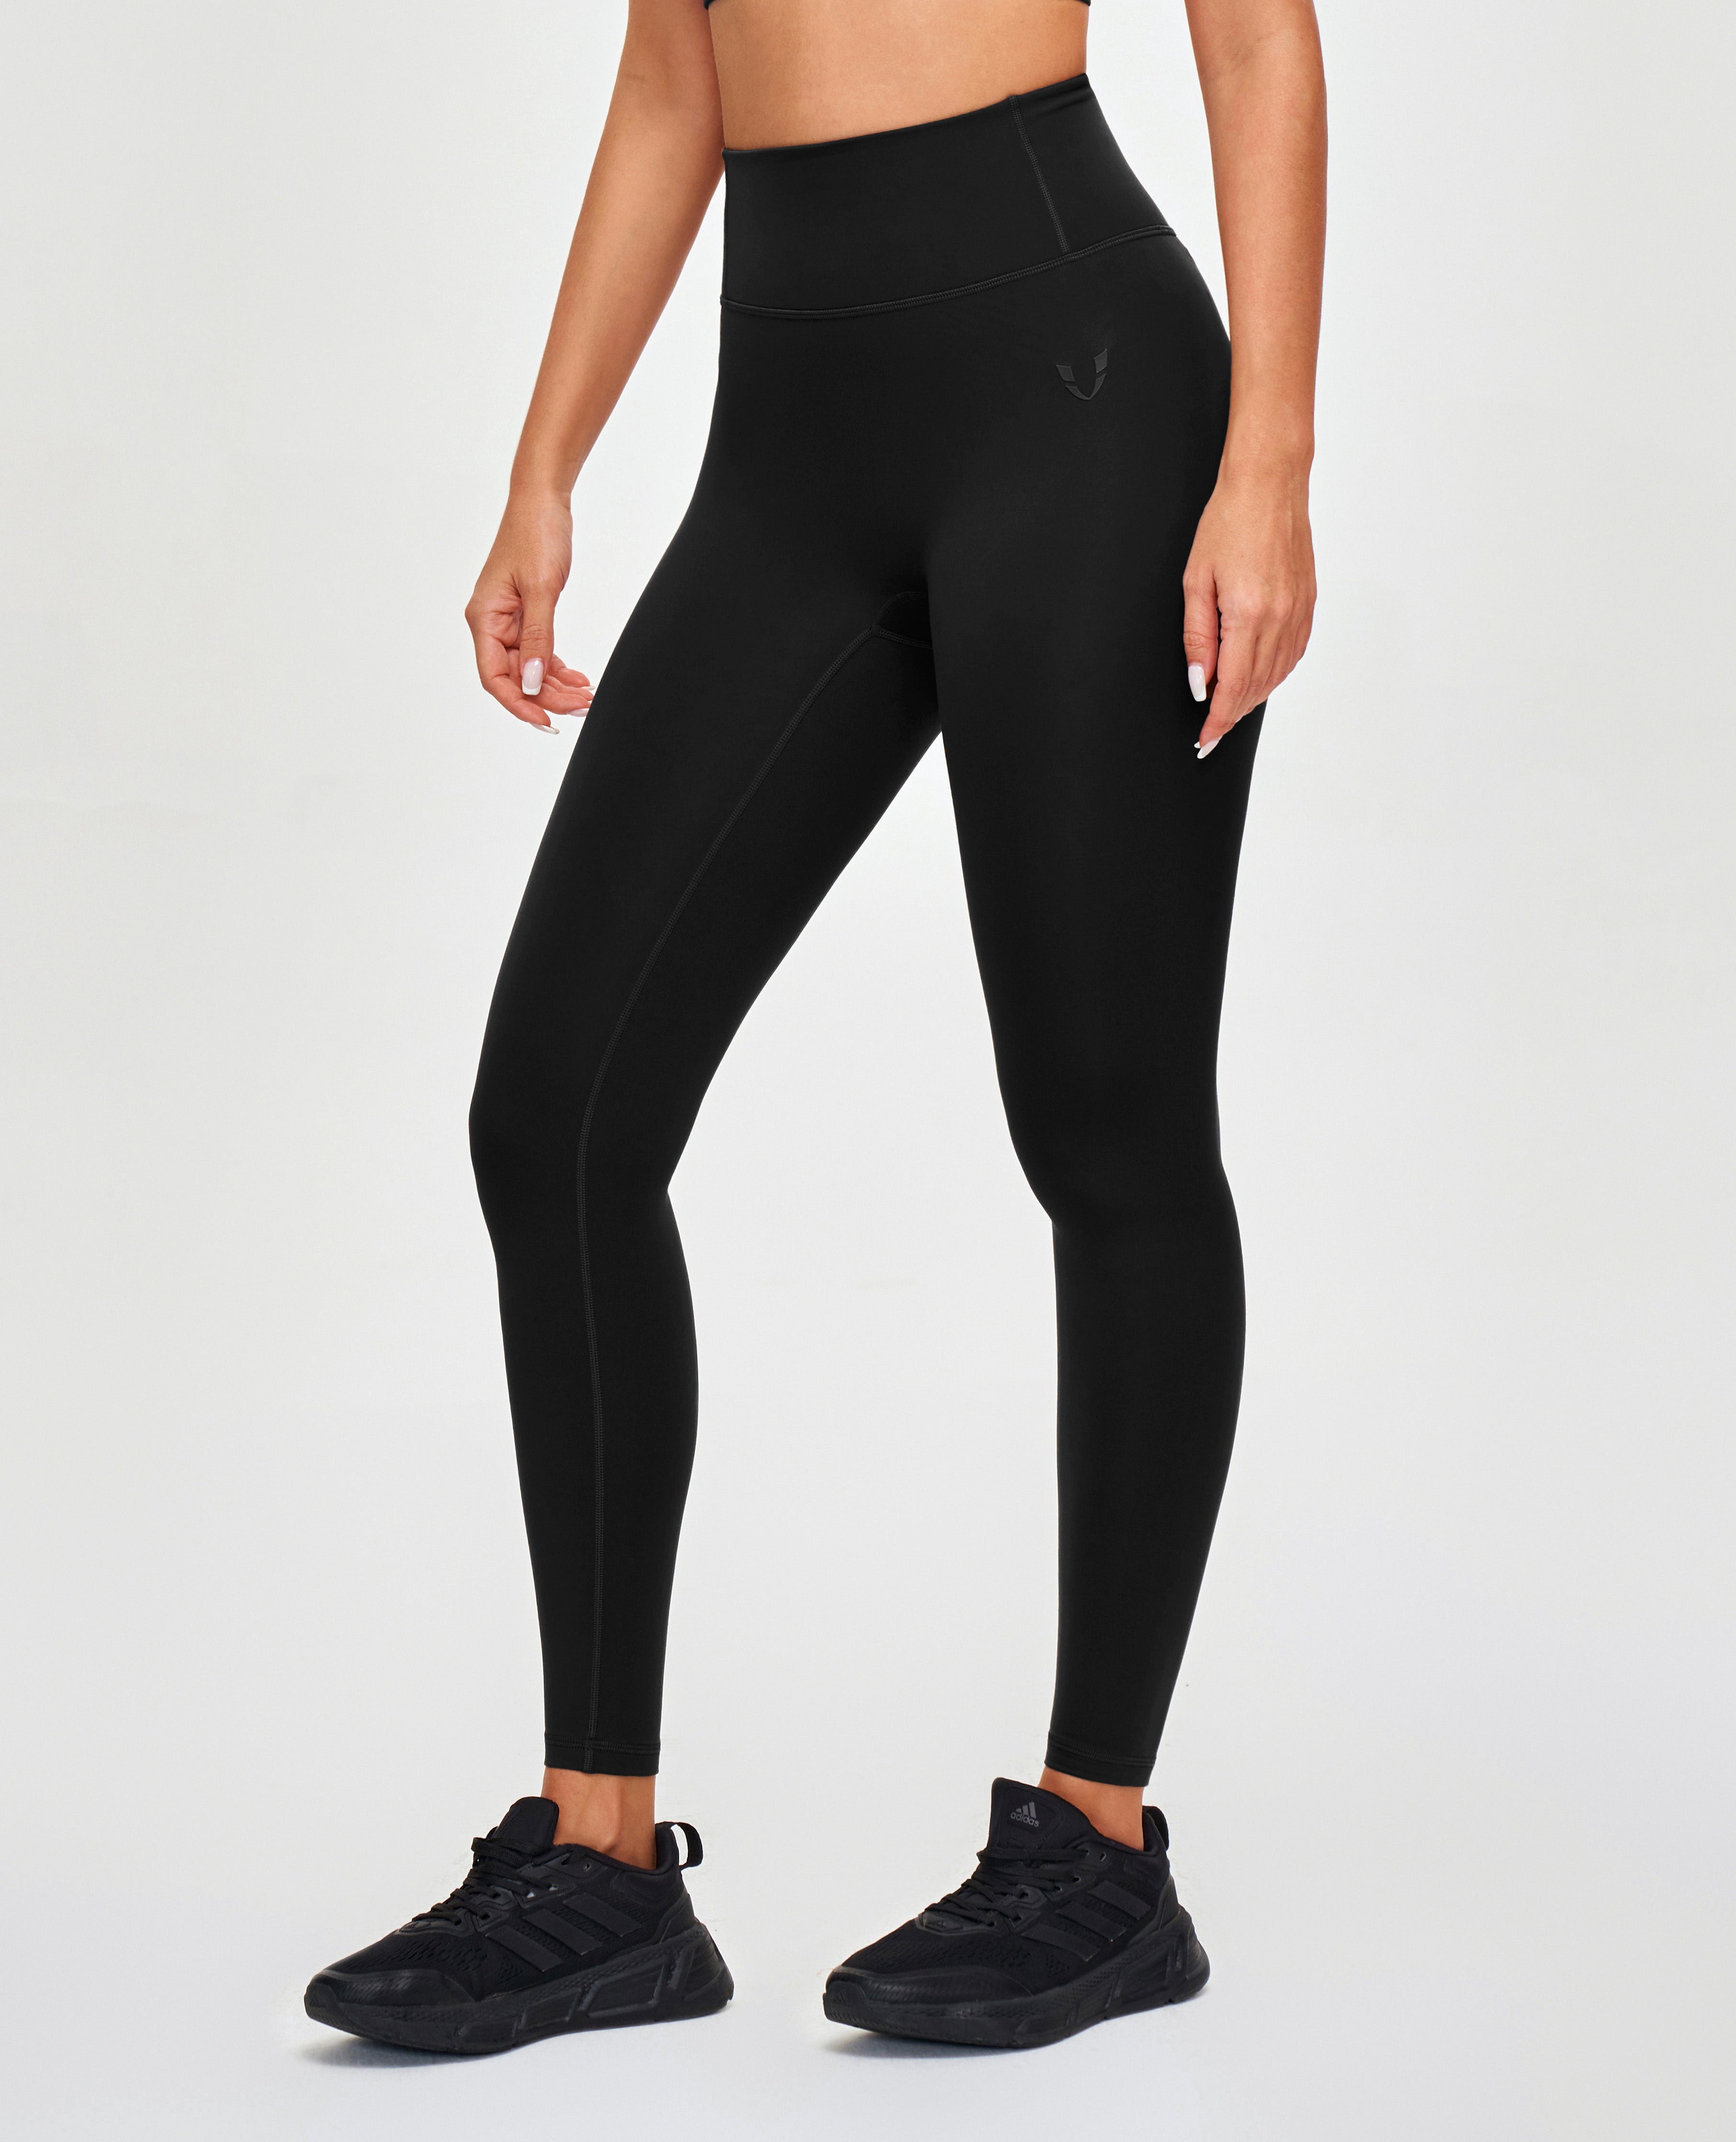 Black Extra High Waisted Ankle Biters Leggings